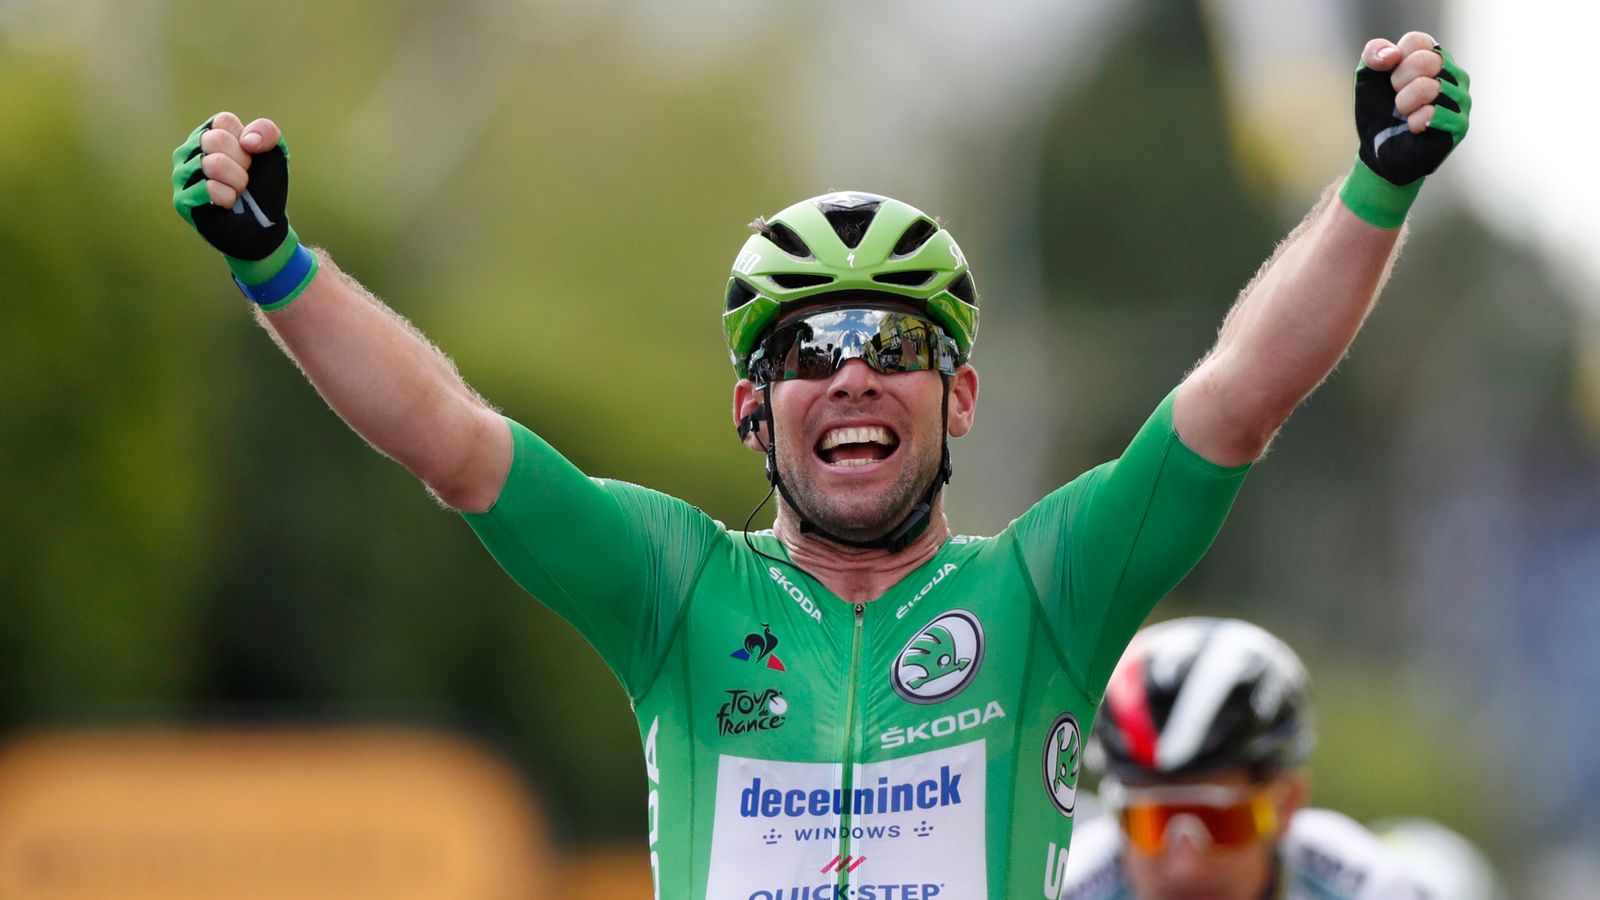 Tour de France Mark Cavendish secures second stage win with victory on